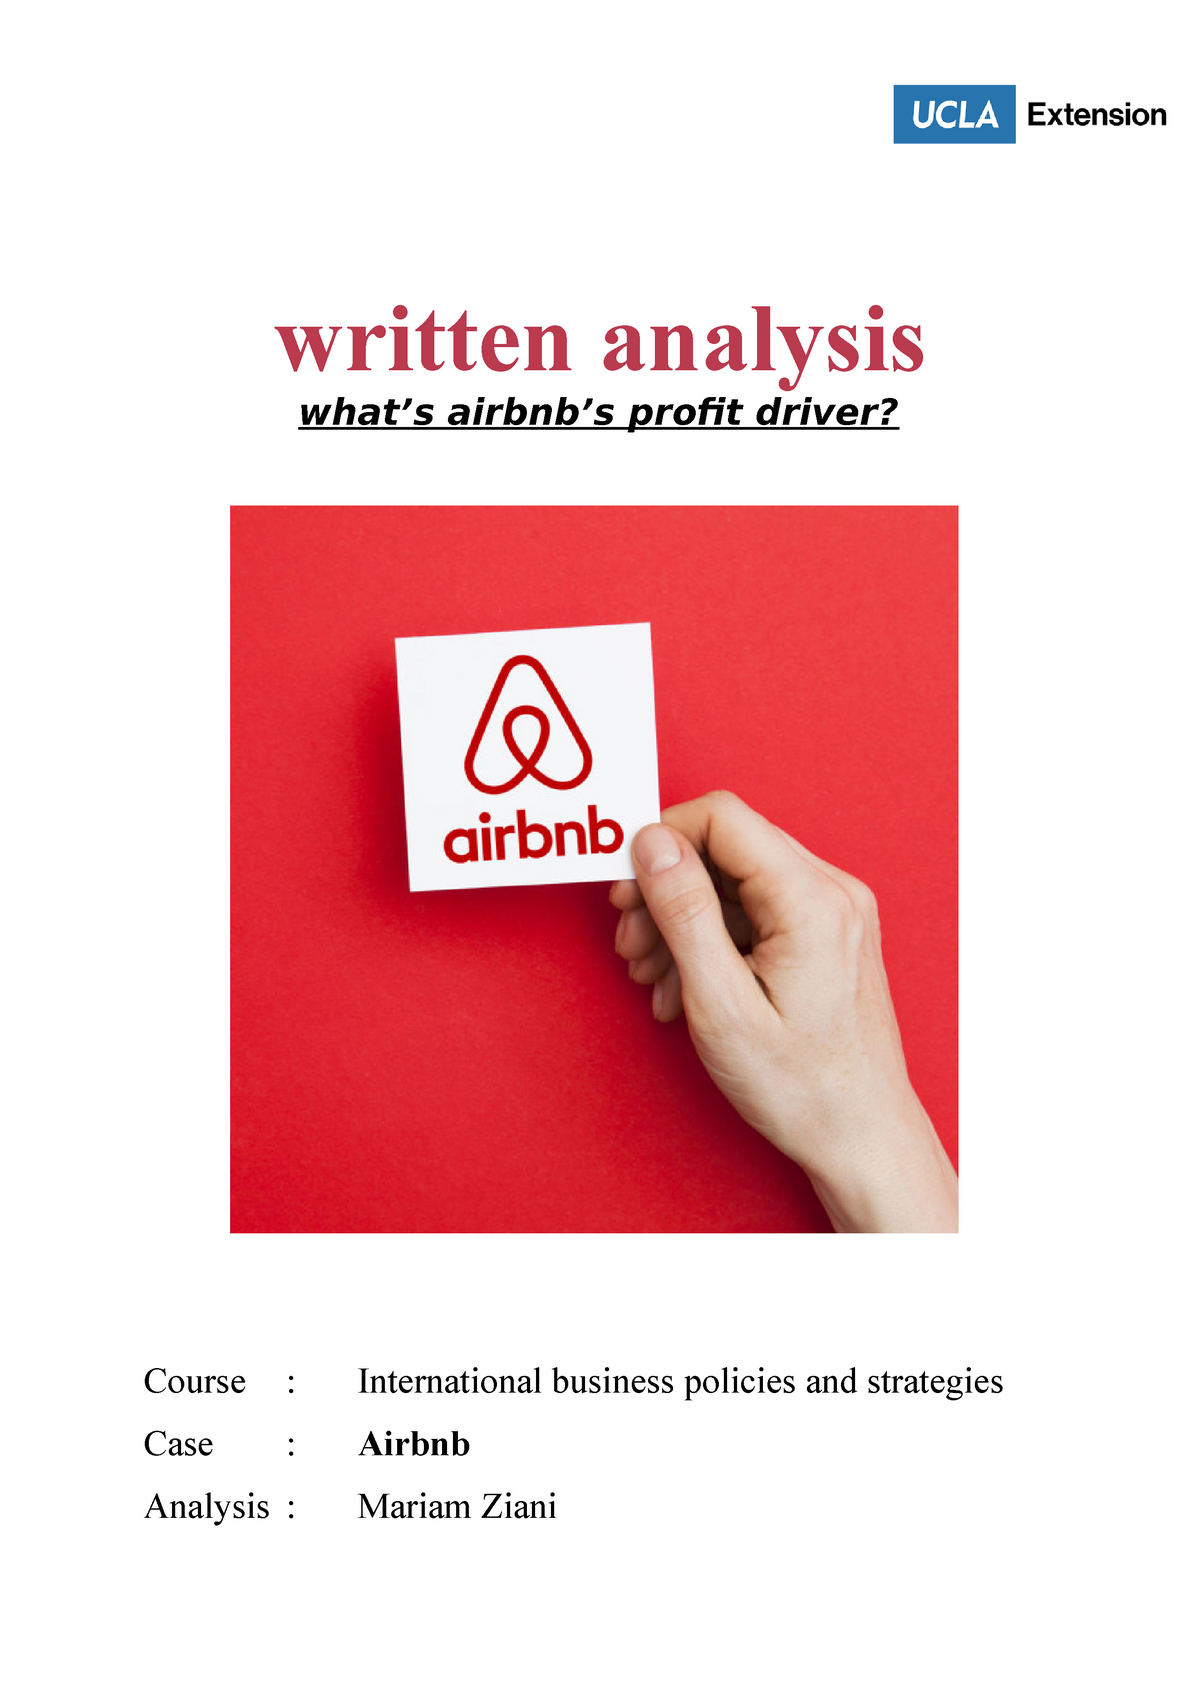 study-case-airbnb-business-plan-and-strategy-written-analysis-what-s